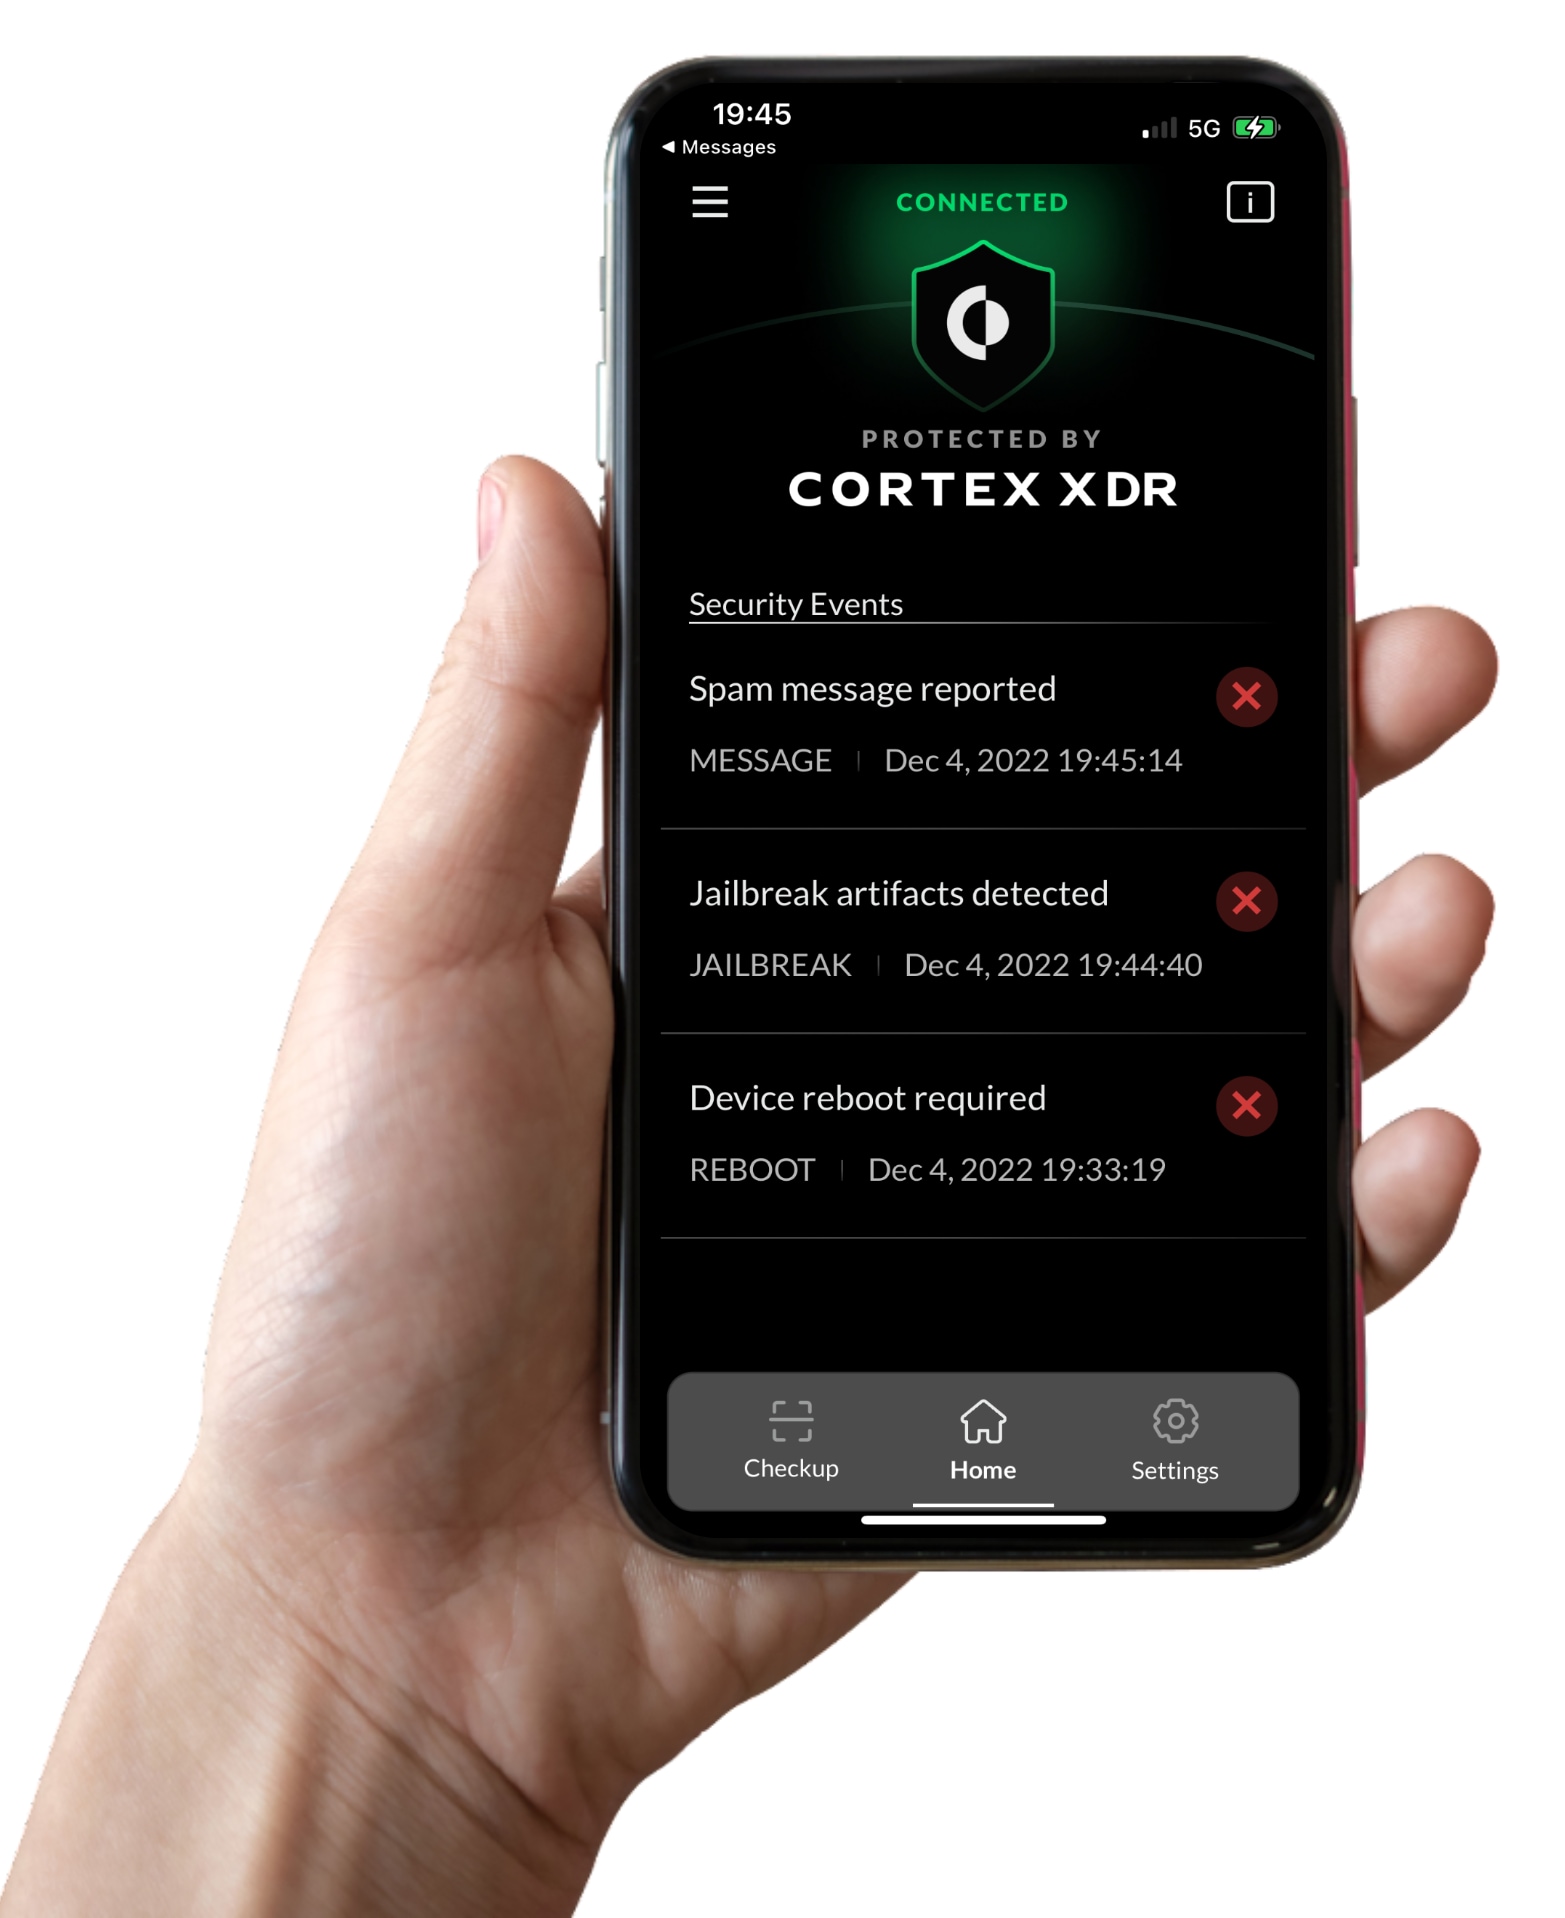 Screenshot of being protected by Cortex XDR, showing security events.